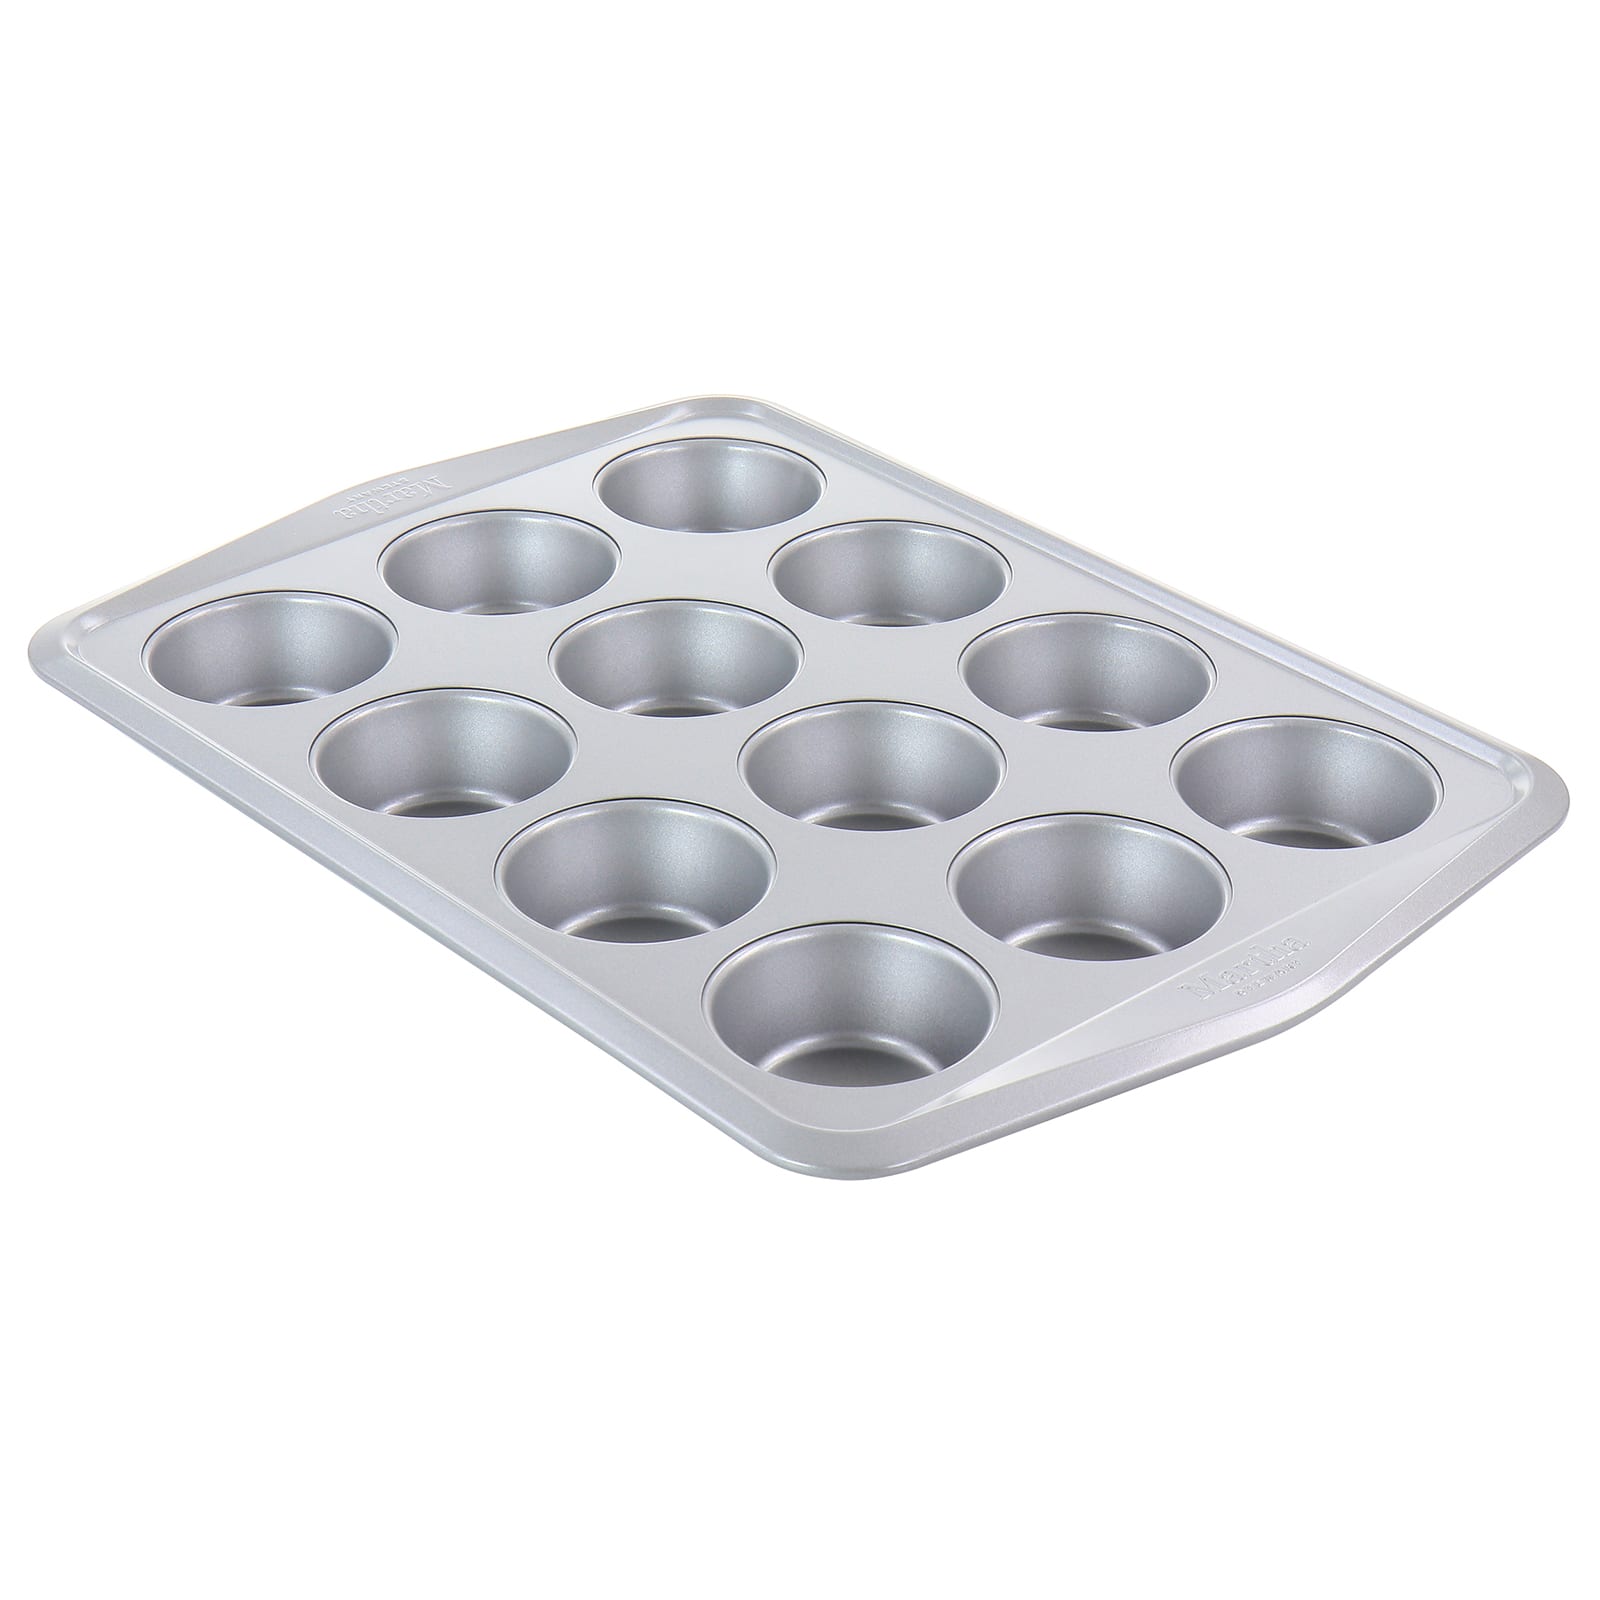 Recycled stainless steel muffin tin for 12 muffins